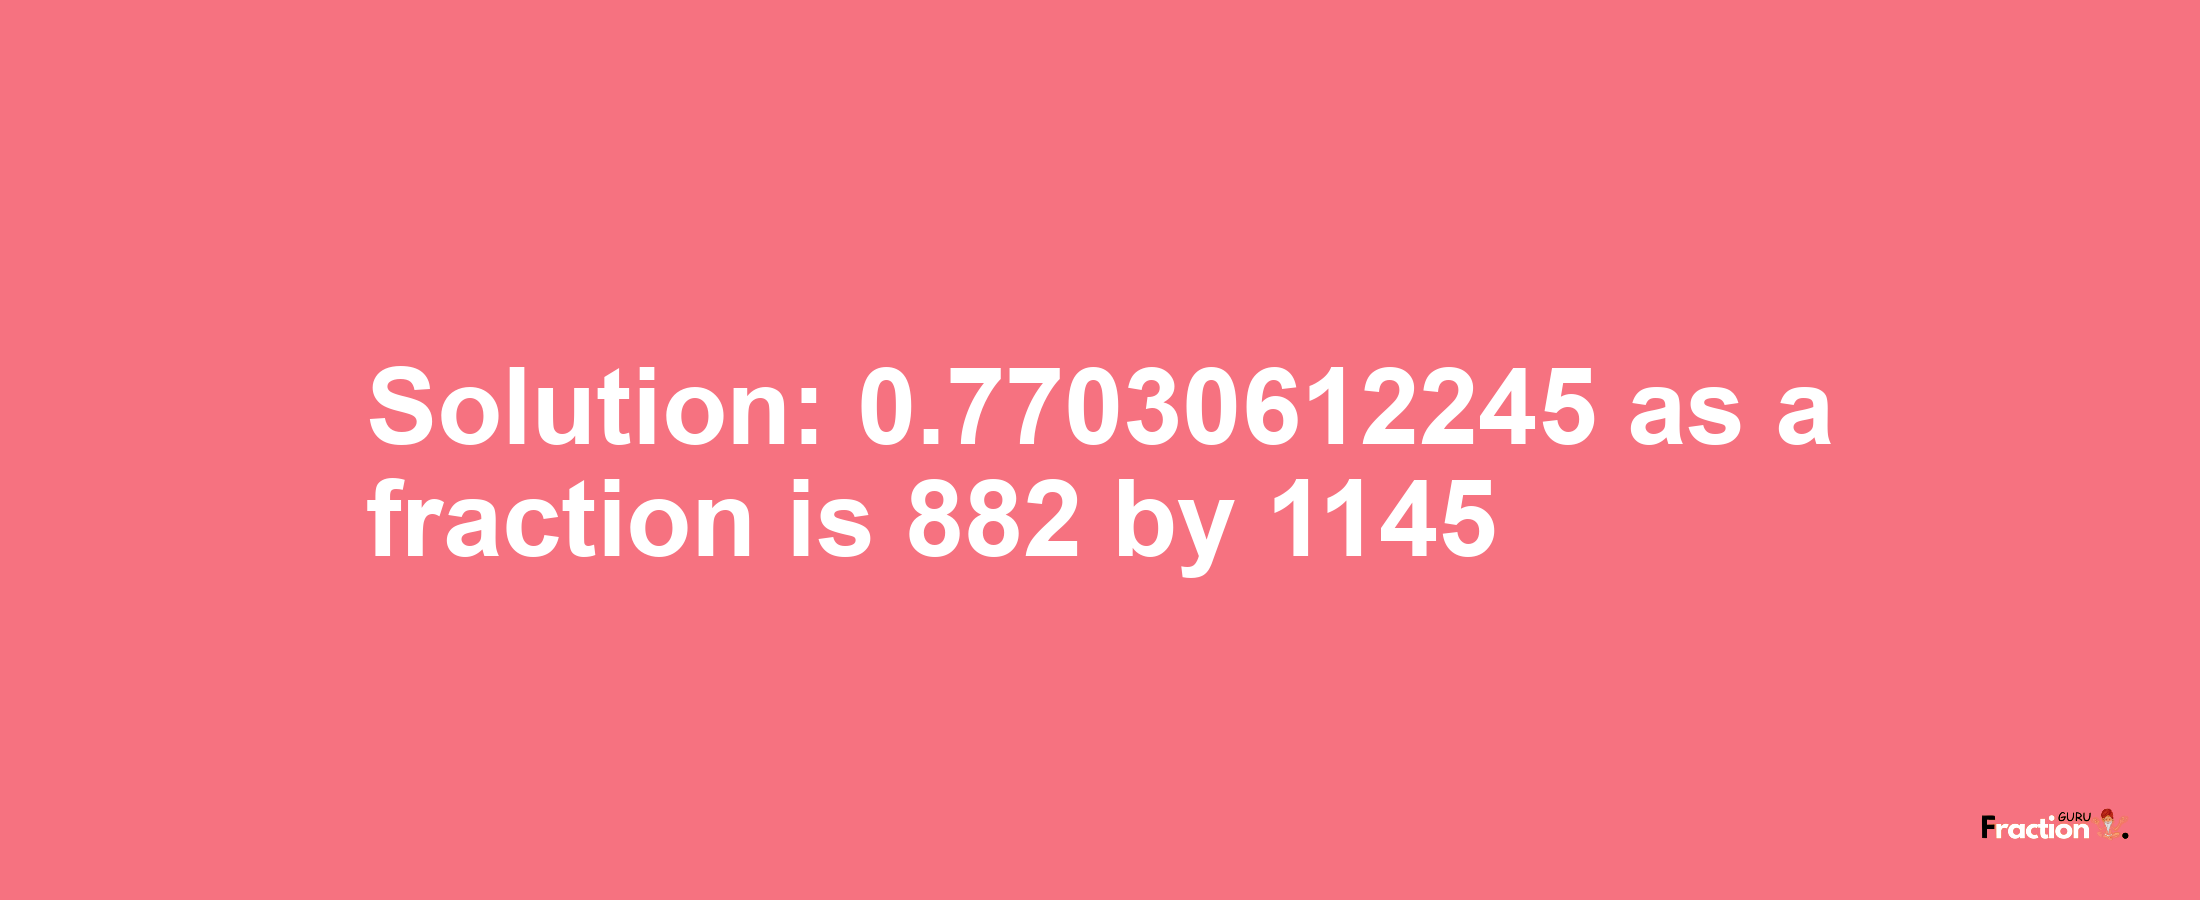 Solution:0.77030612245 as a fraction is 882/1145